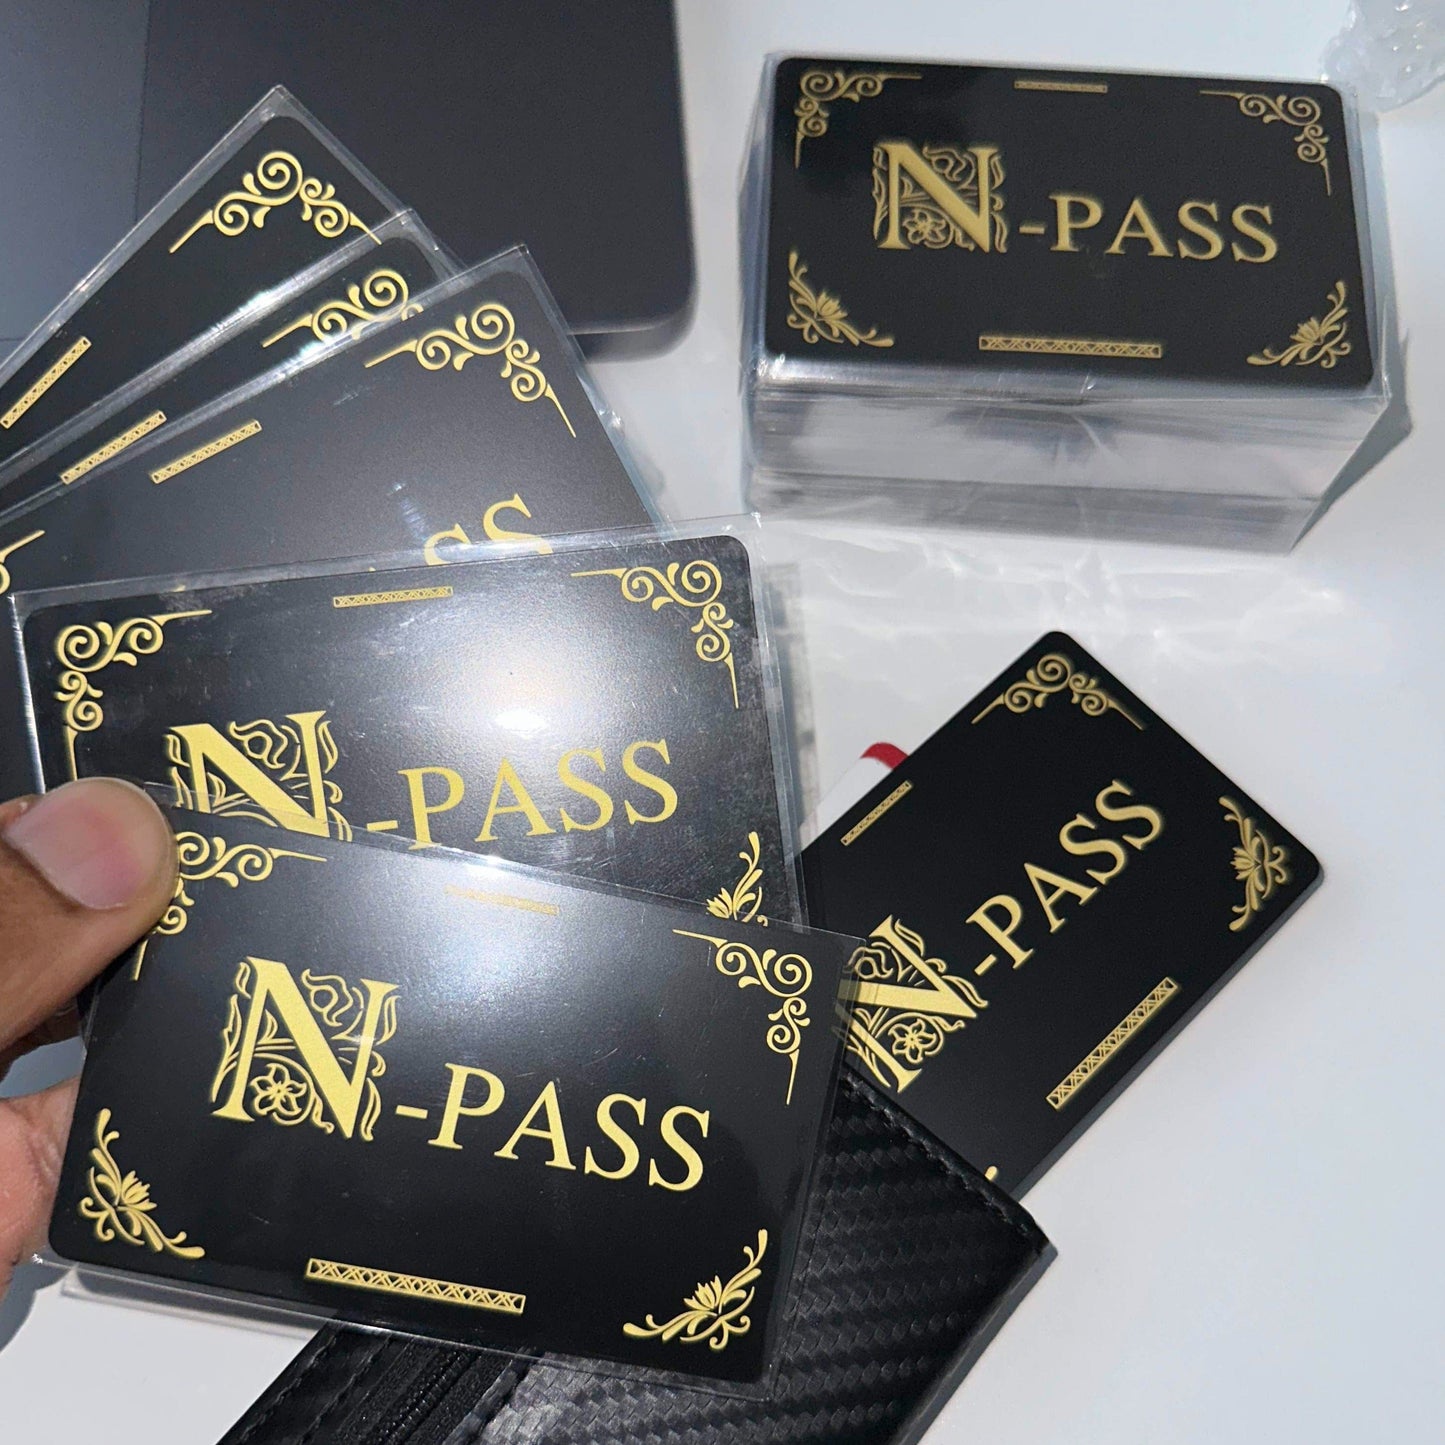 The Official N-Pass [Free Today]